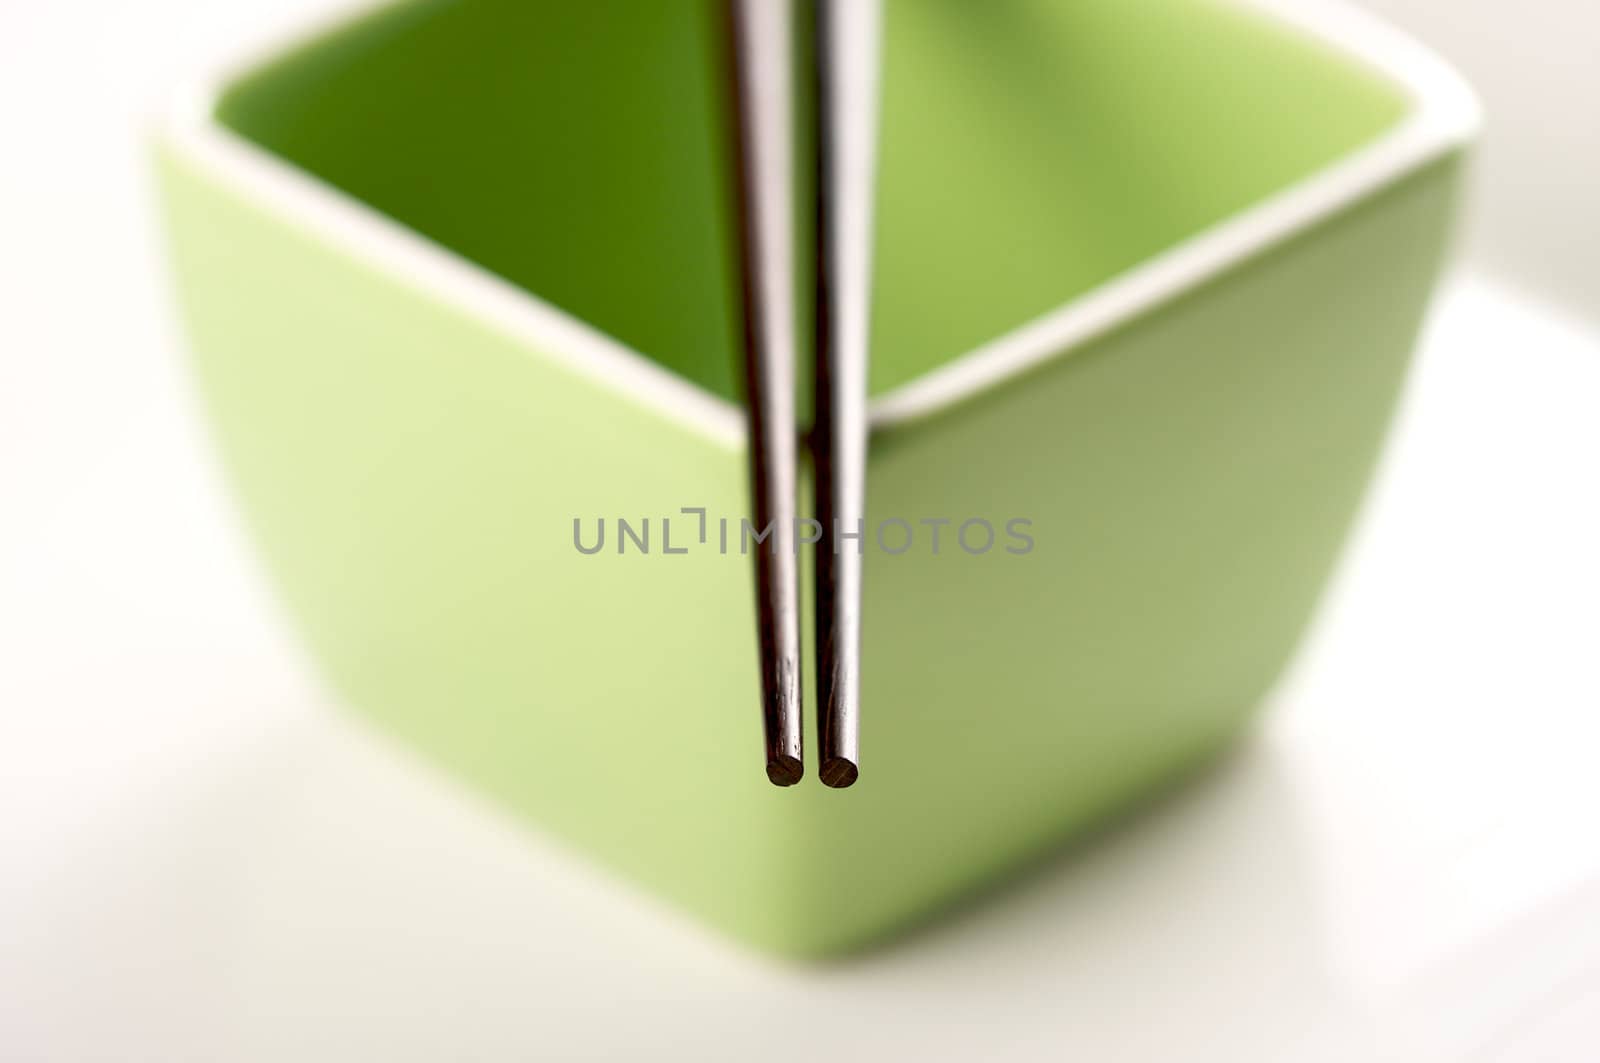 Chopsticks & Green Bowl by Feverpitched